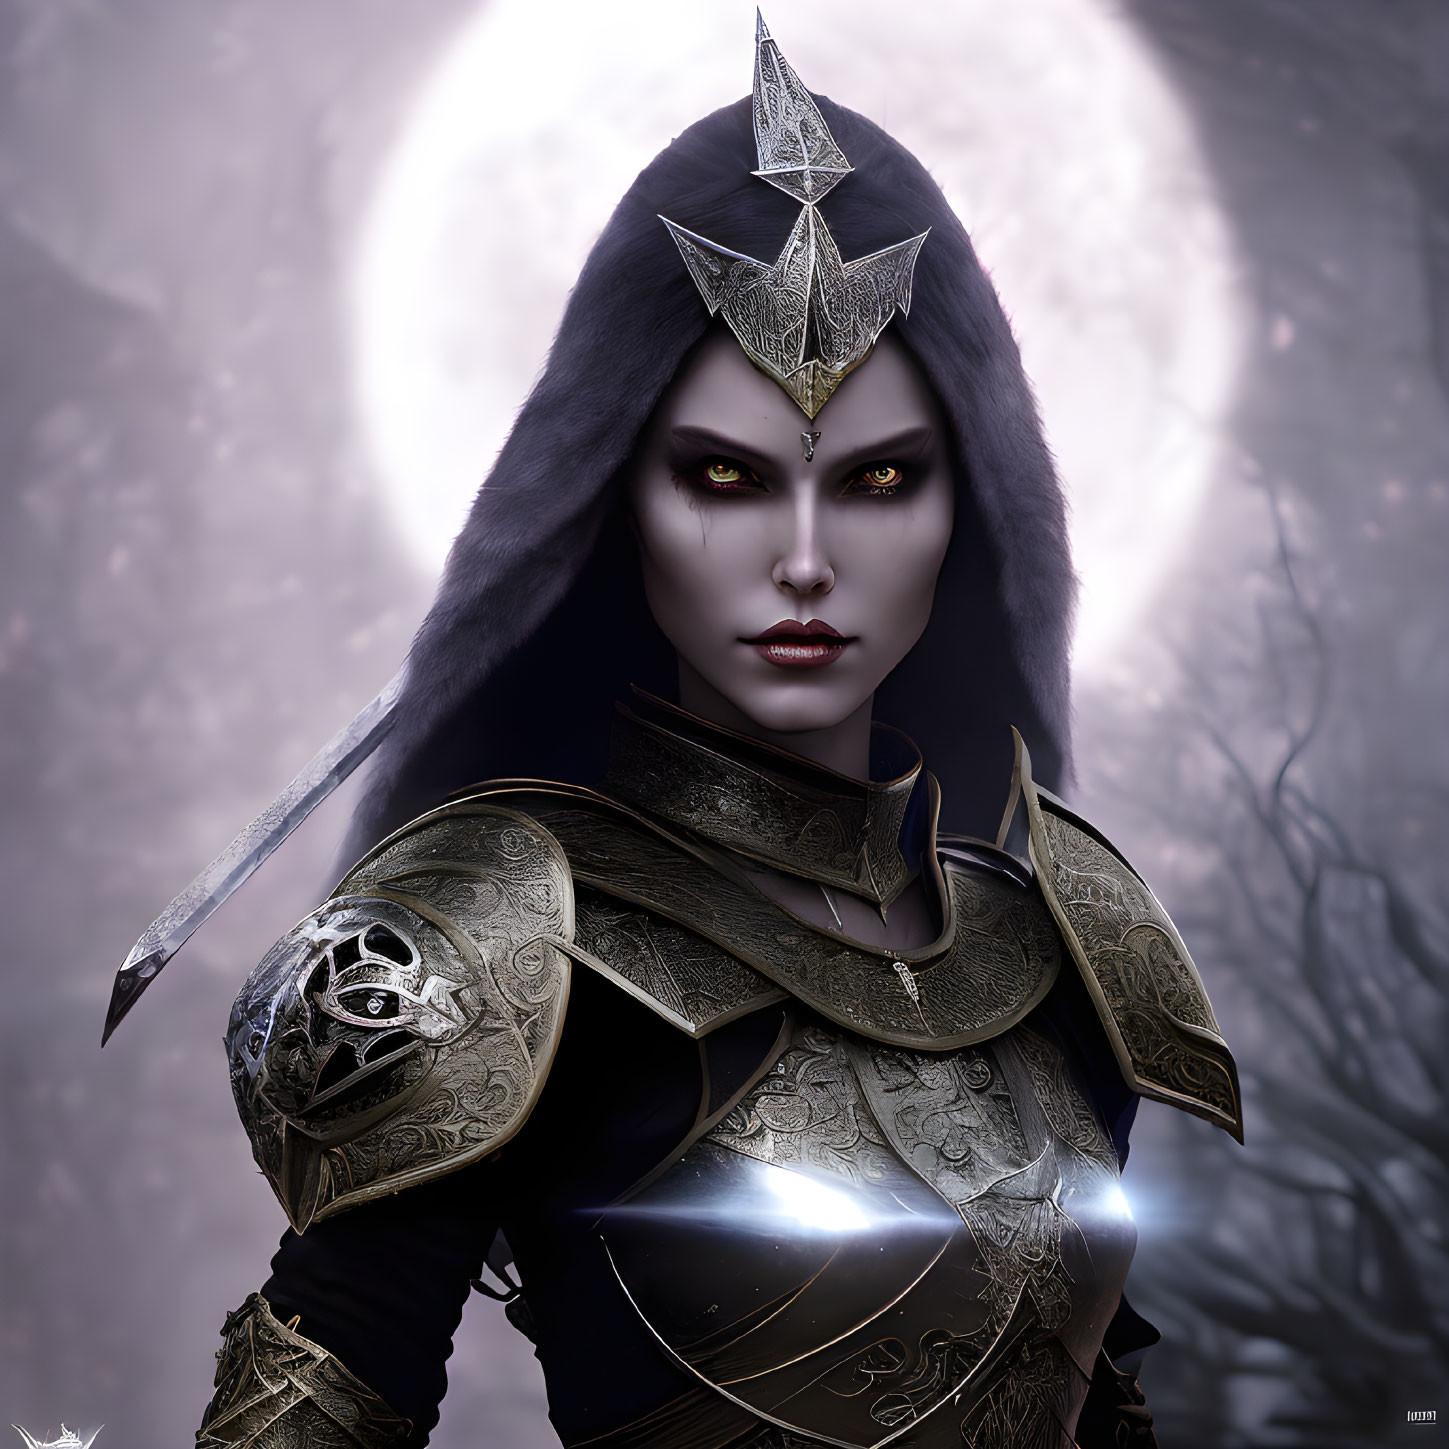 Fantasy dark sorceress in ornate armor with yellow eyes on moonlit background